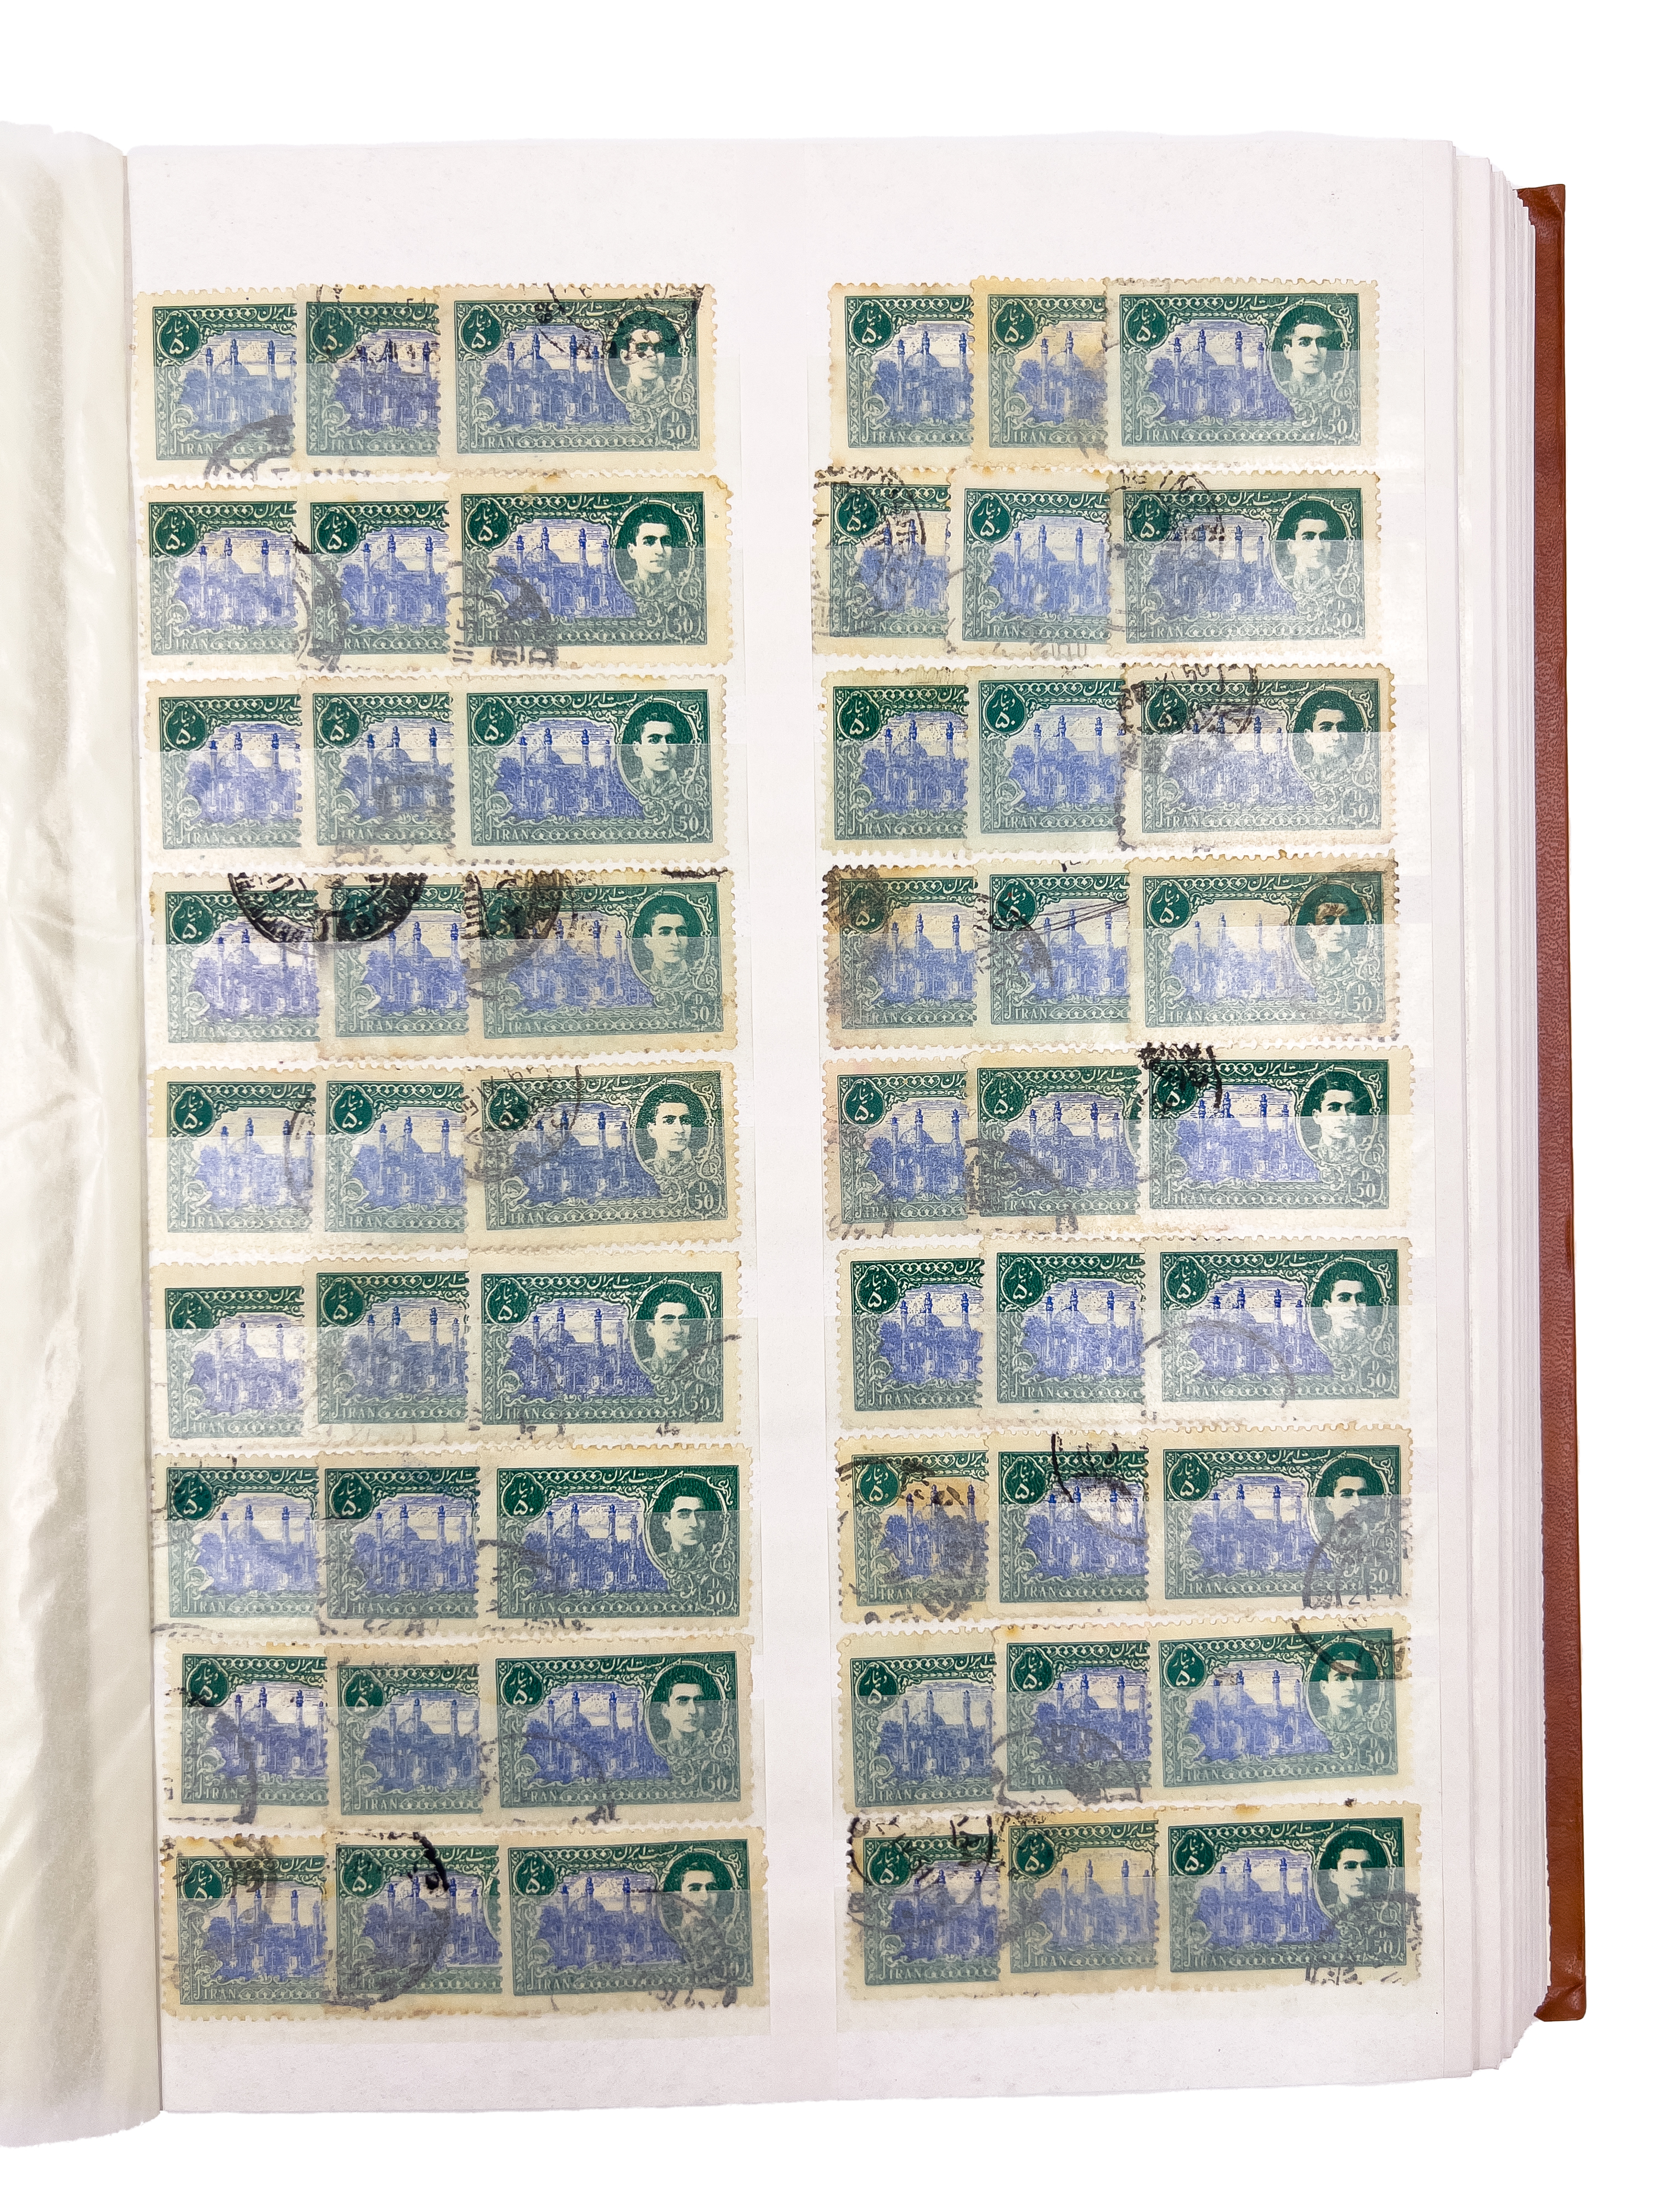 RARE & EXTENSIVE COLLECTION OF PERSIAN PAHLAVI POST STAMPS - Image 40 of 63